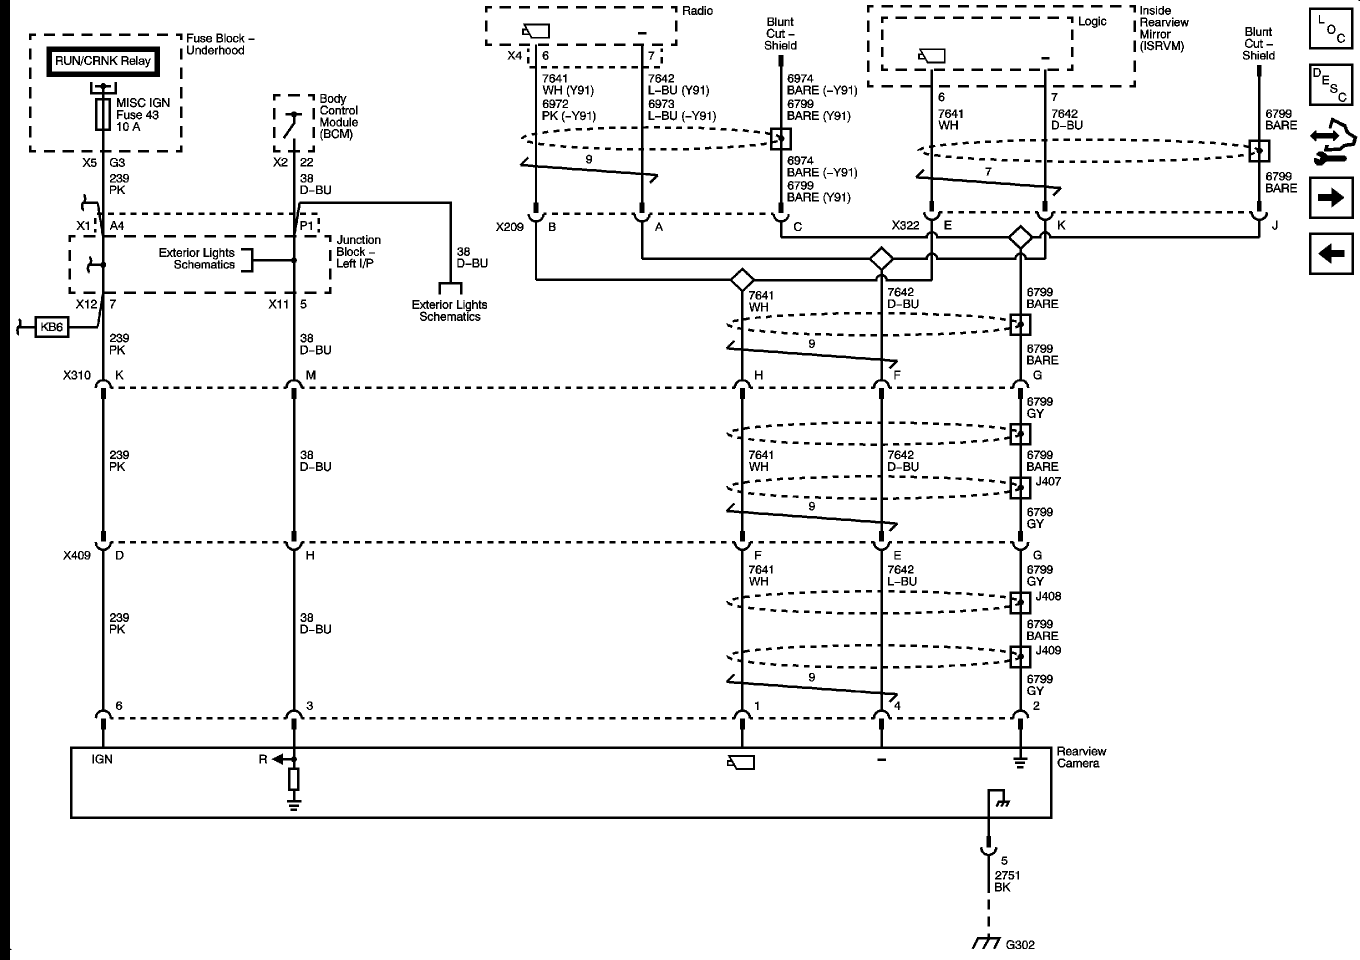 2015 Nissan Altima Stereo Wiring Diagram from www.adcmobile.com